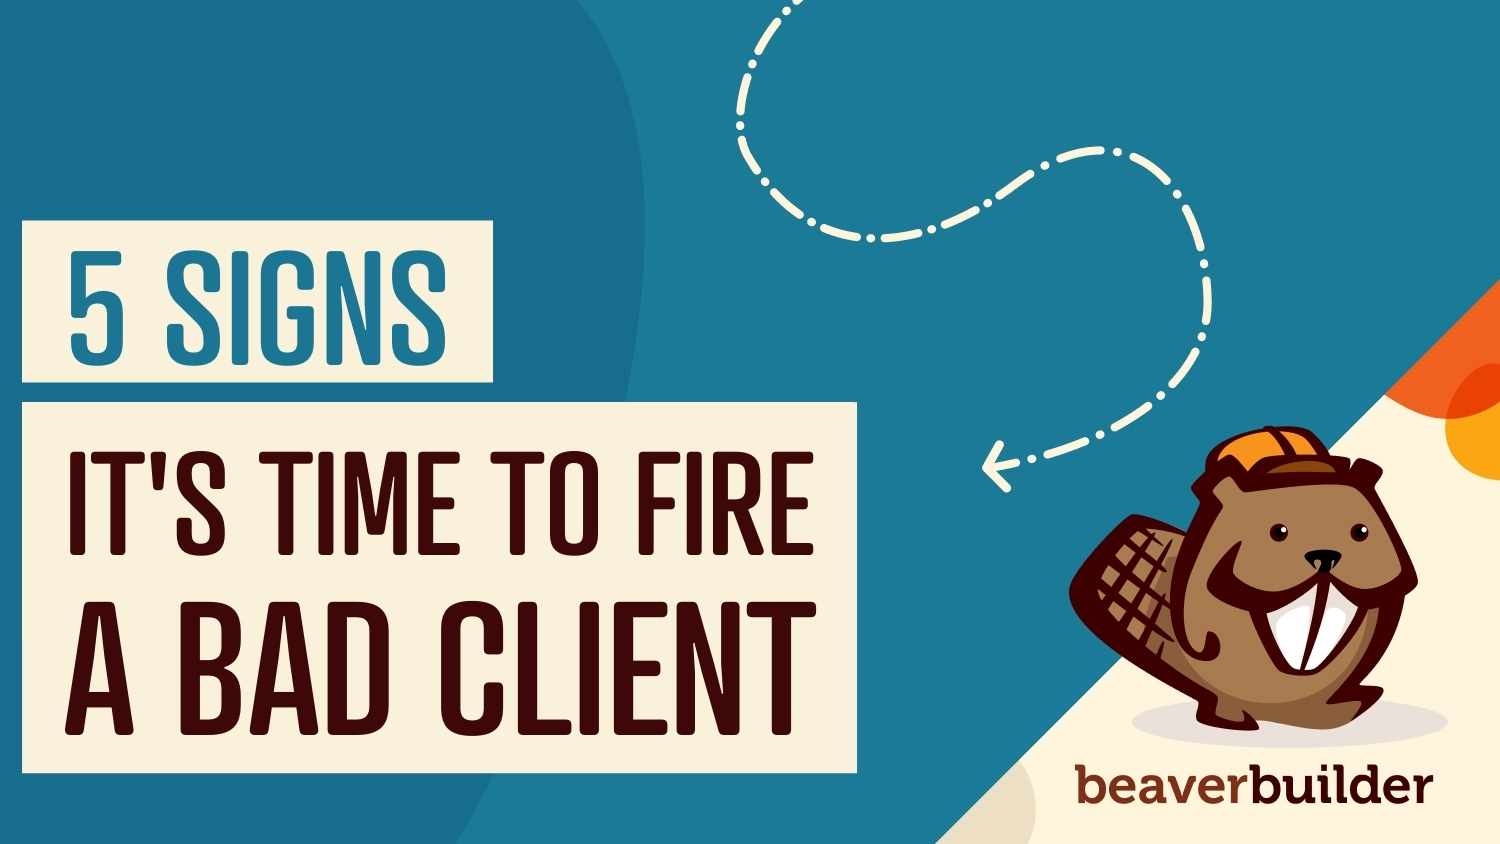 5 signs it's time to fire a bad client and how to do it | beaver builder blog